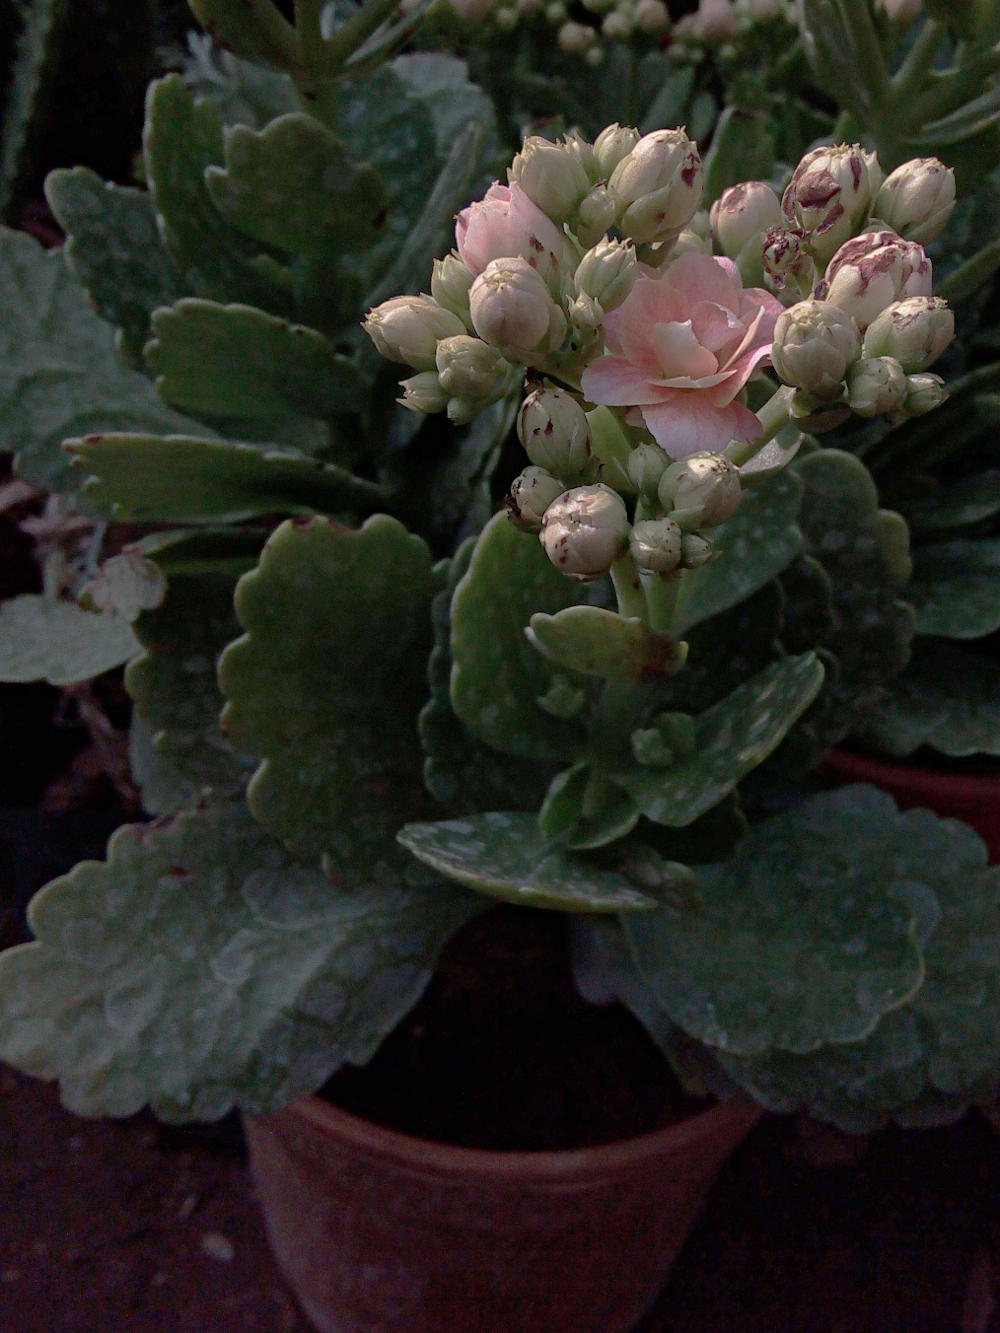 /wp-content/uploads/2020/10/hyderguda%20succulent%20with%20flowers%20detail.jpg